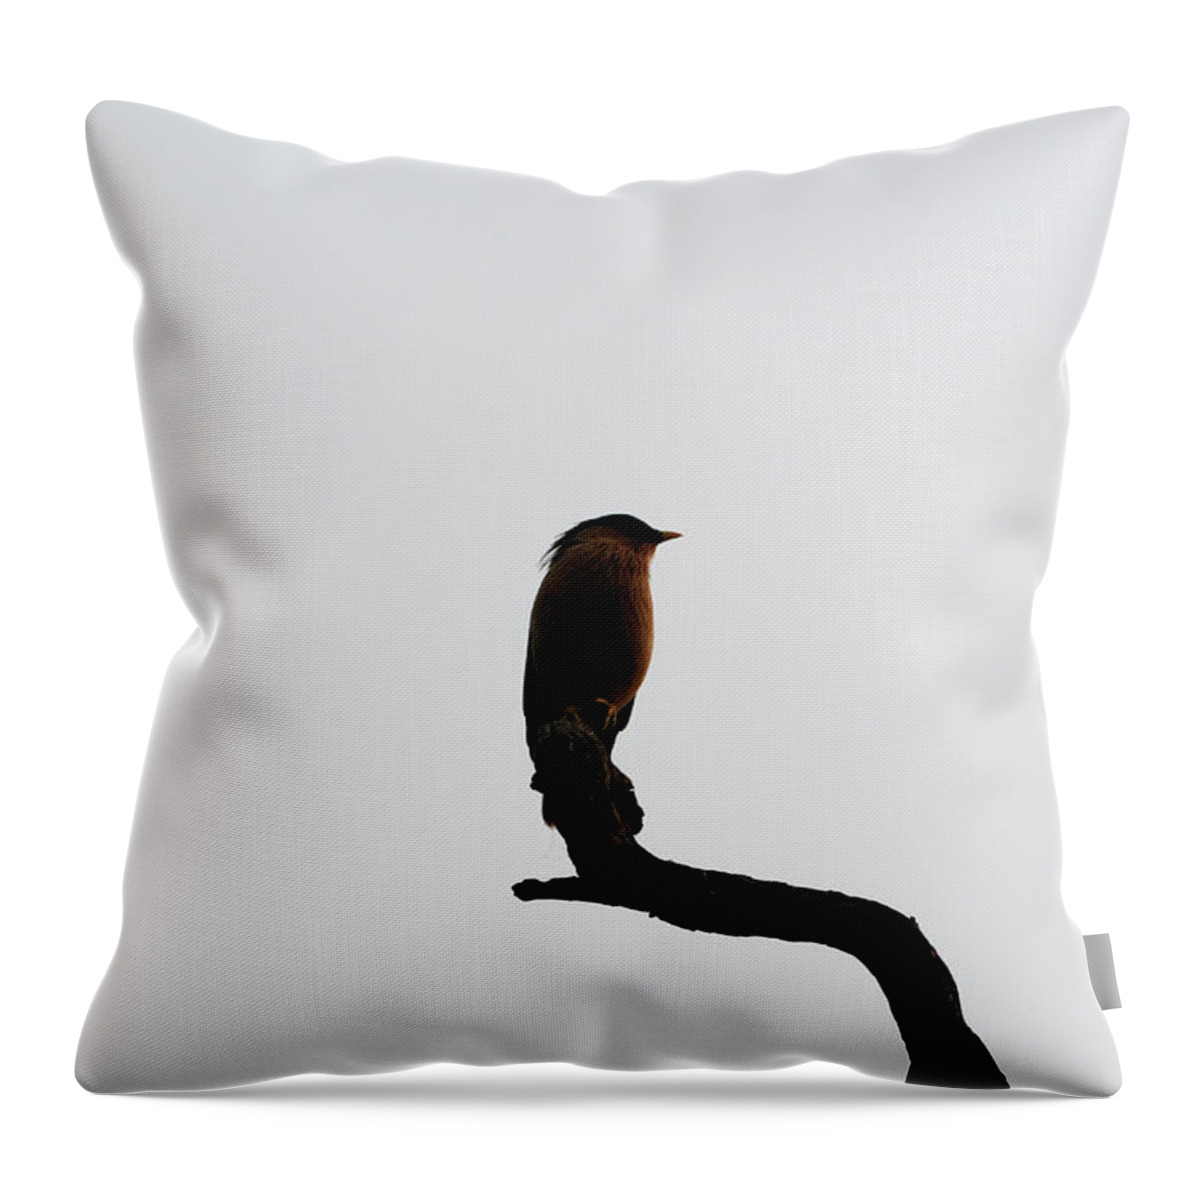 Animal Themes Throw Pillow featuring the photograph Starling by Ravi